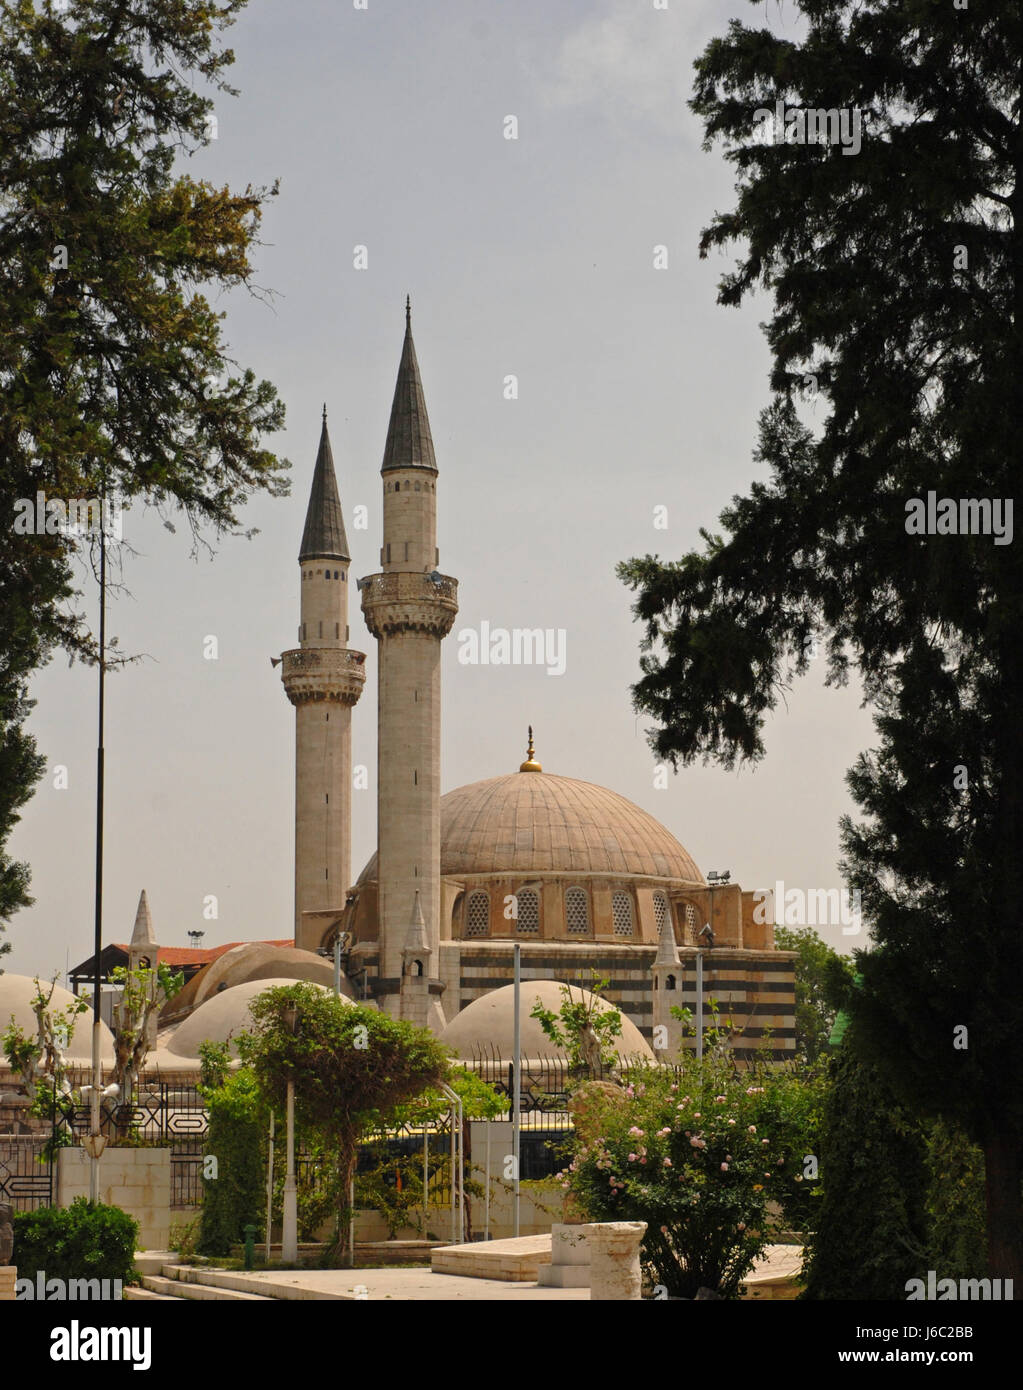 tower belief islam mosque tower religion belief dome syria islam mosque Stock Photo